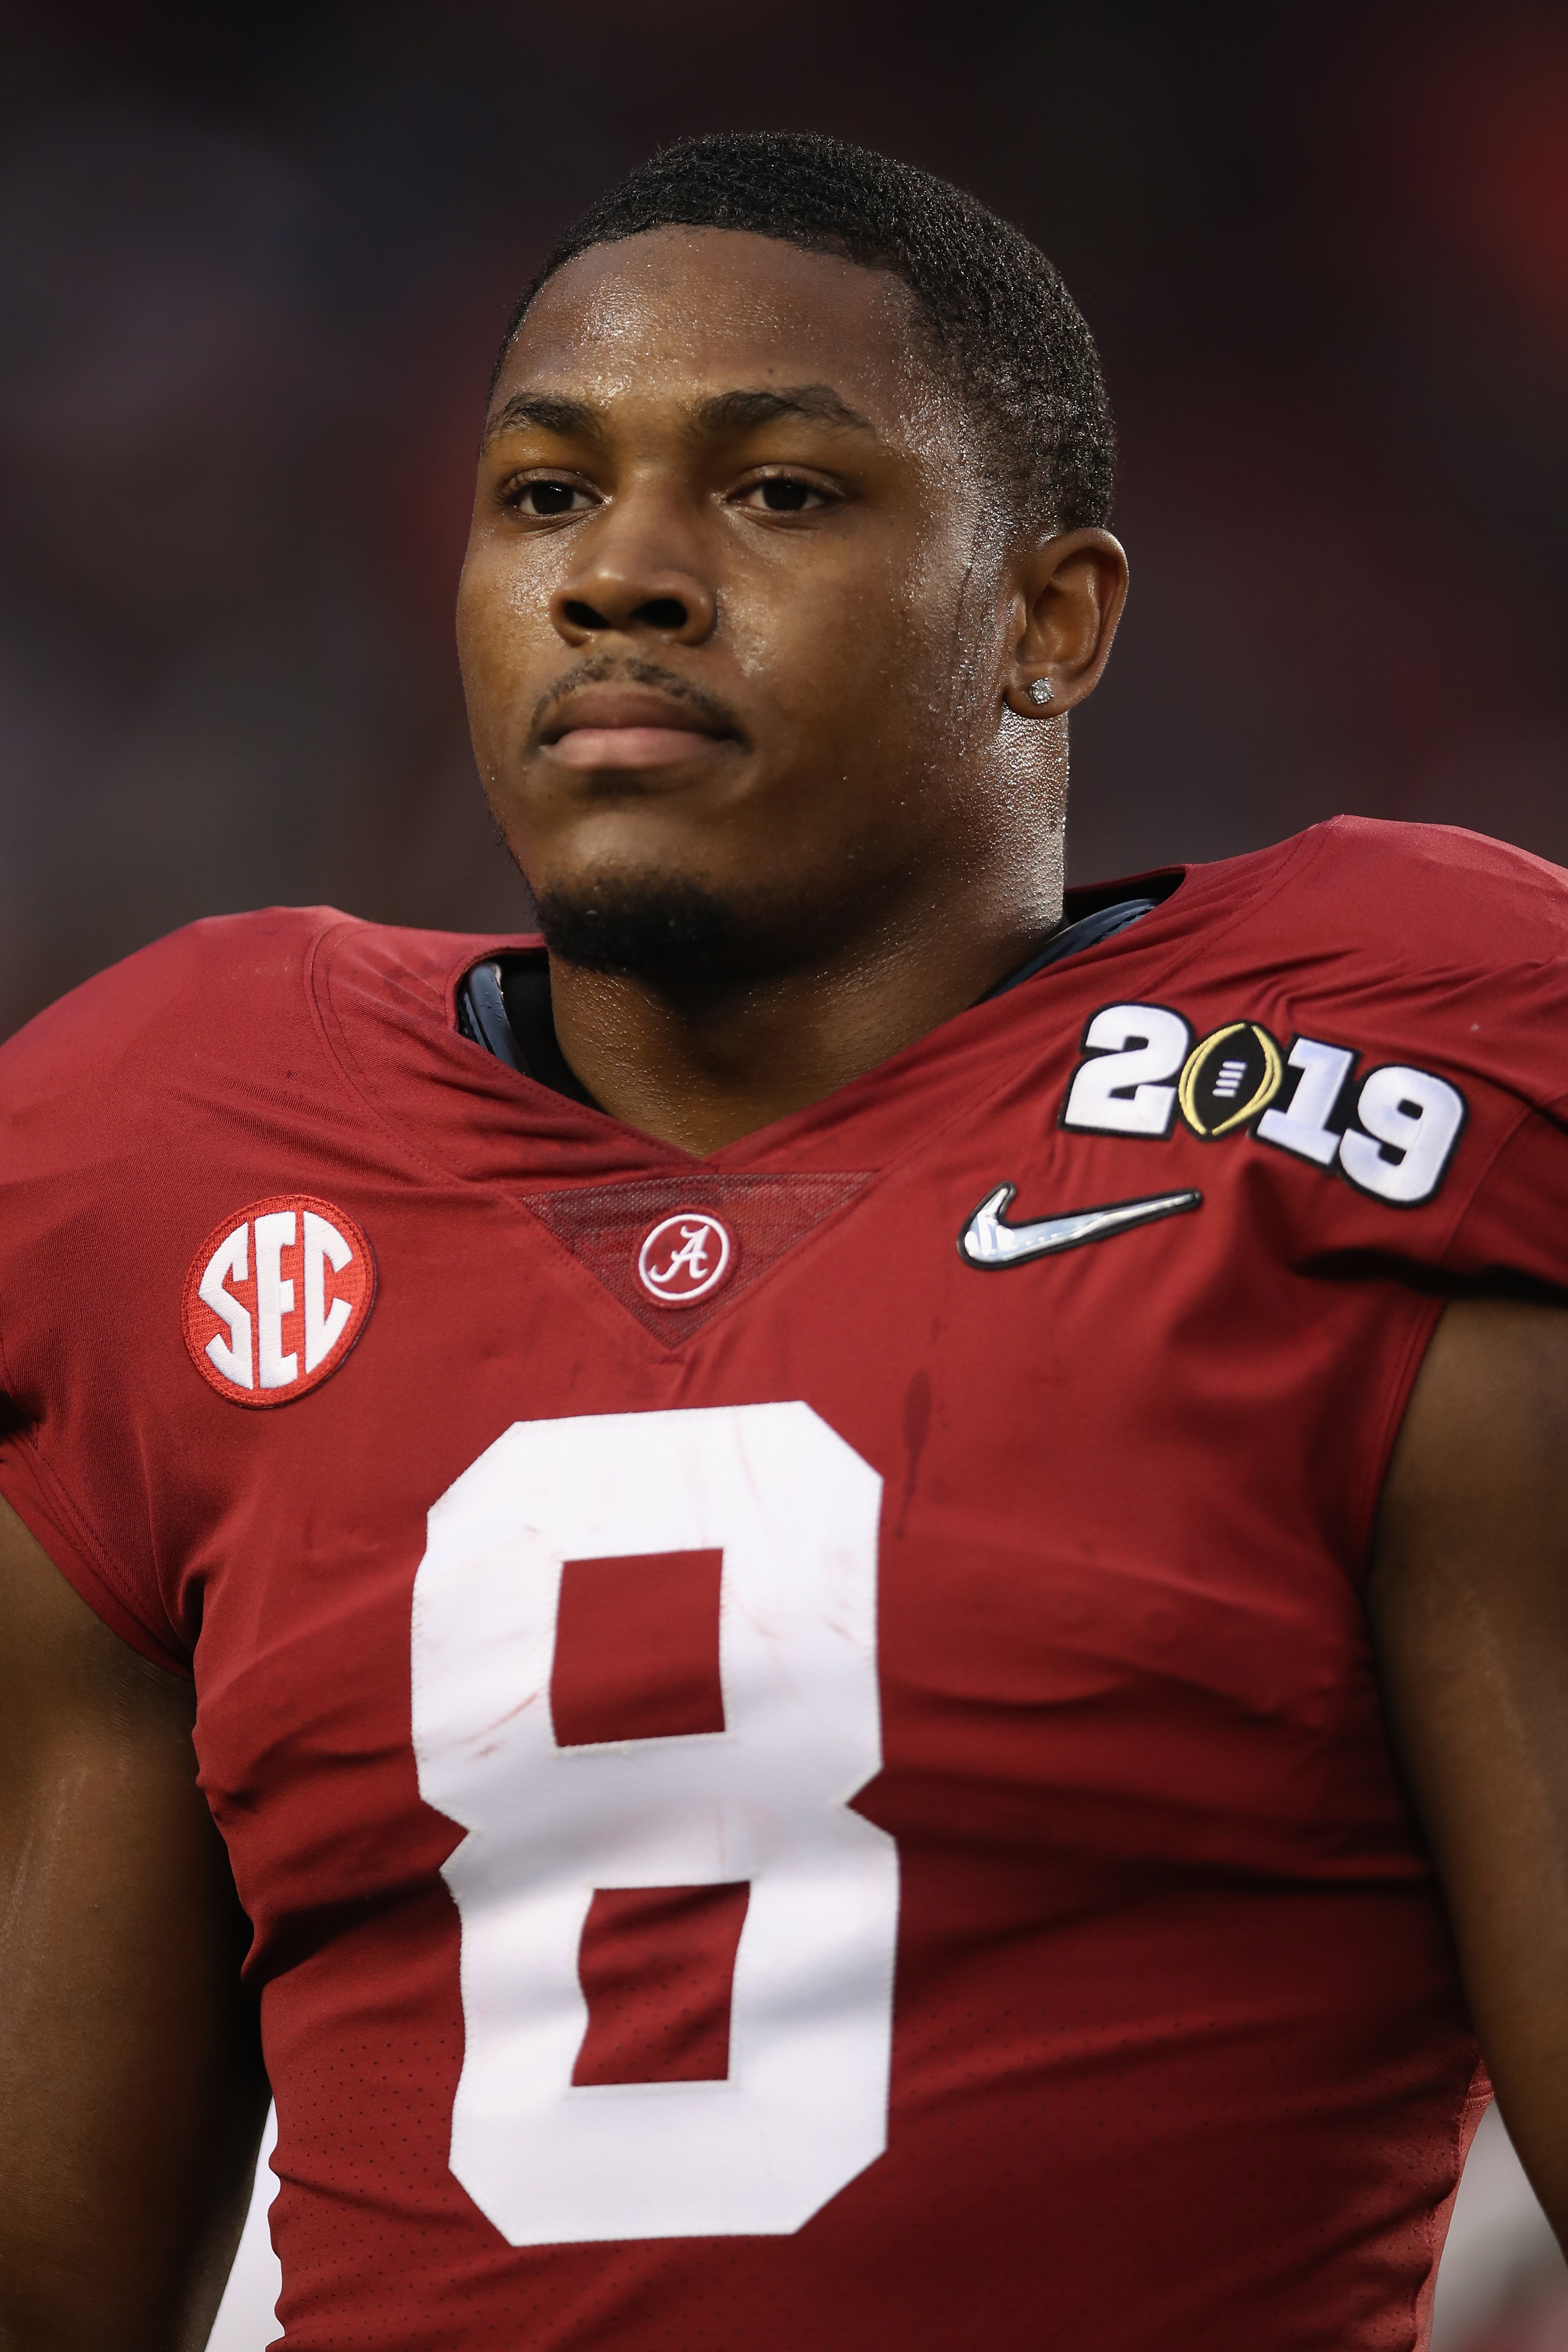 Josh Jacobs, #8 of the Alabama Crimson Tide, looks on prior to the CFP National Championship against the Clemson Tigers presented by AT&T at Levi's Stadium on January 7, 2019, in Santa Clara, California. | Source: Getty Images